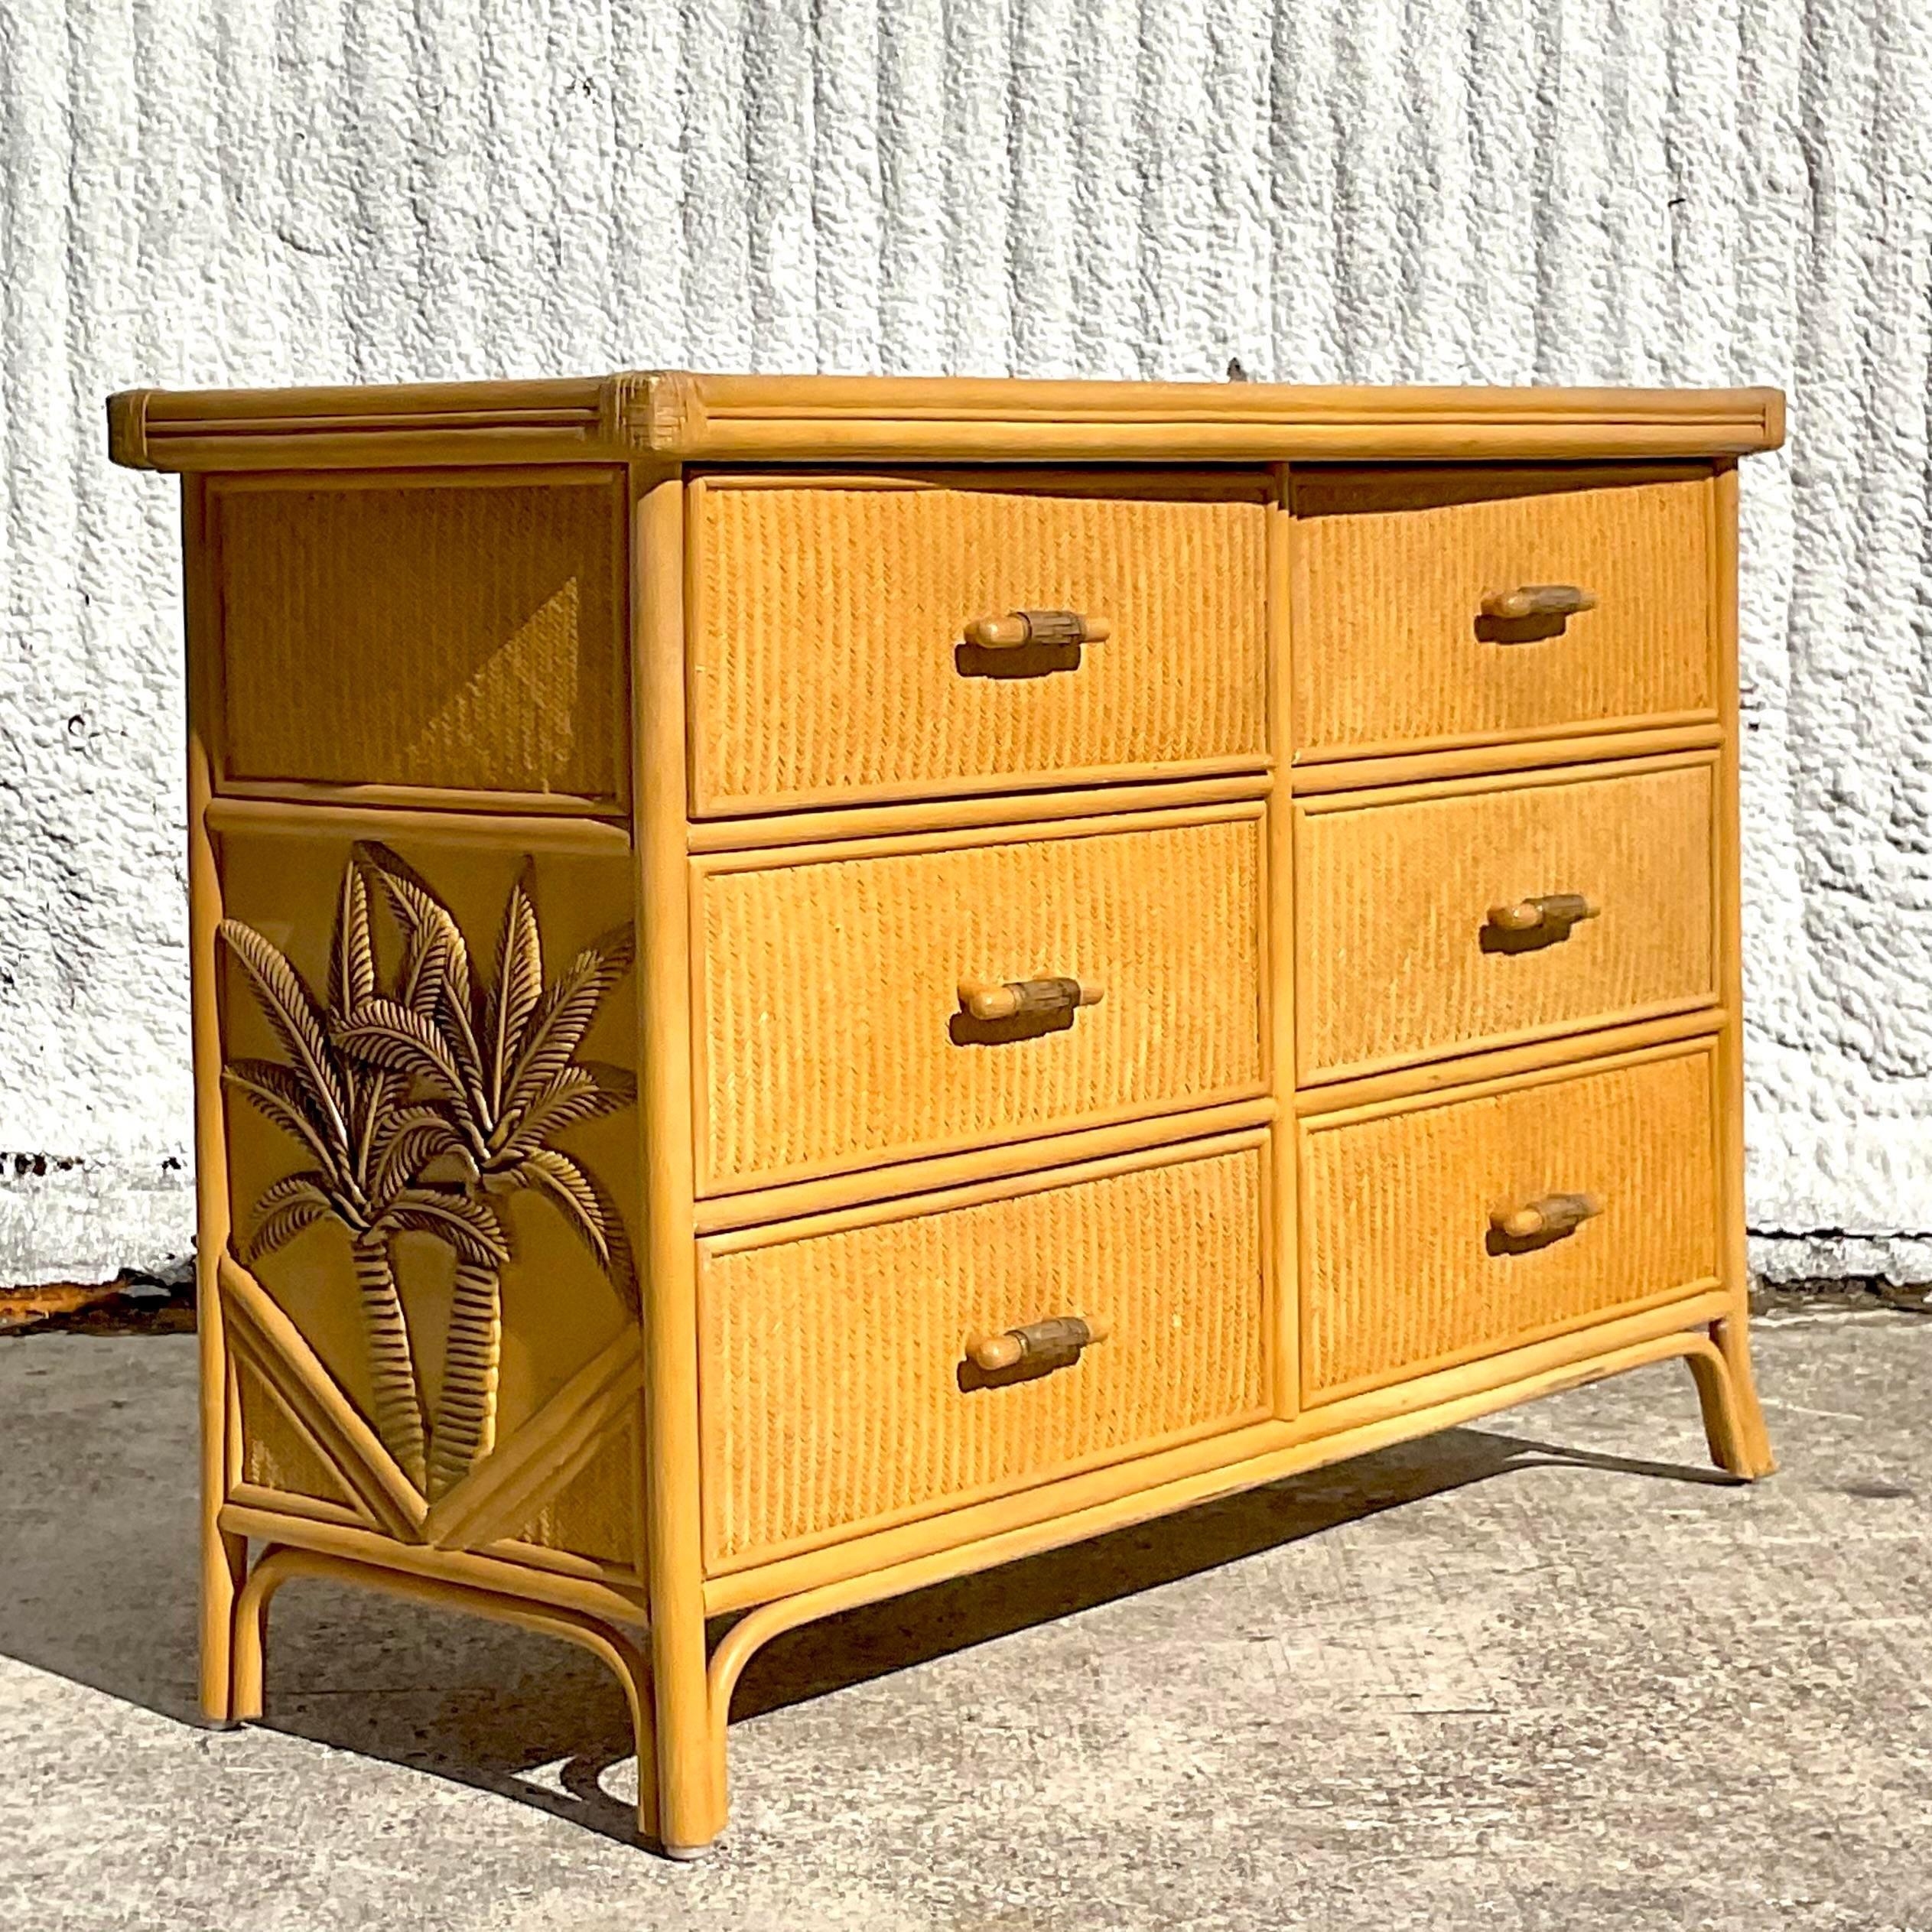 A fantastic vintage Coastal six drawer dresser. A chic woven rattan with carved palm trees on the side. Really takes it to the next level. Acquired from a Palm Beach estate.